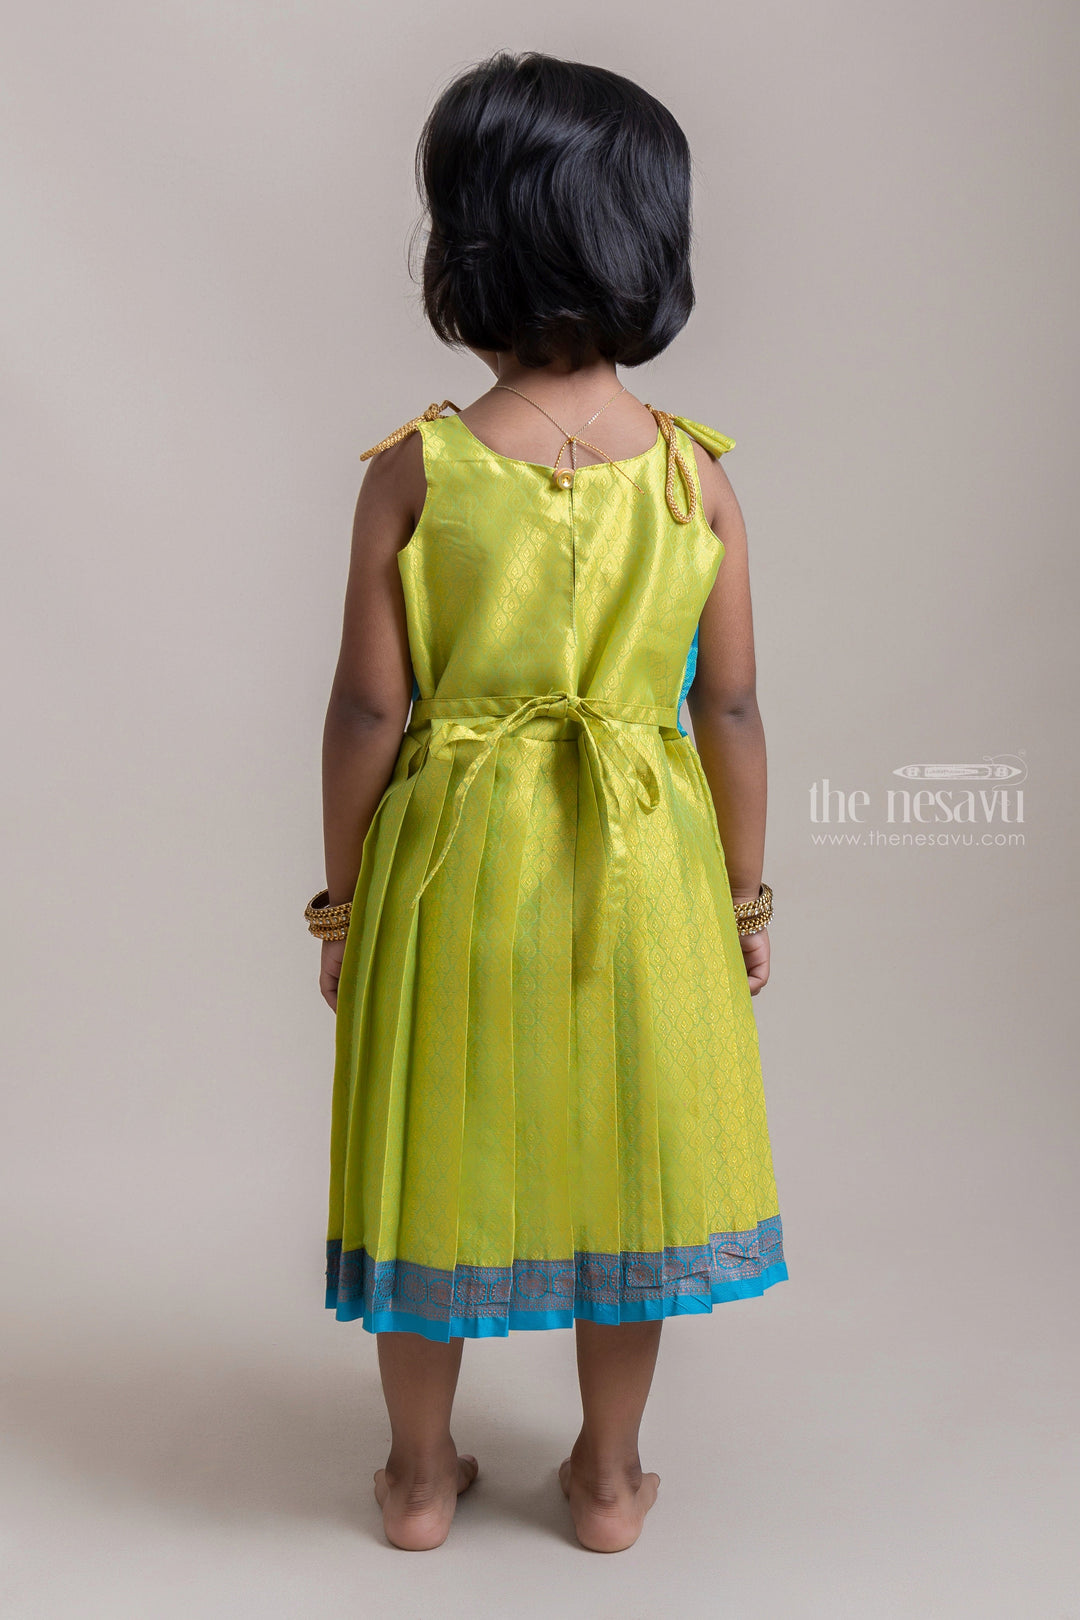 The Nesavu Tie-up Frock Green And Blue Ethnic Tie-up Silk Frocks With Long Zari Border For Girls Nesavu Latest Tie-Up Dresses For Girls | Kids Festive Collection| The Nesavu